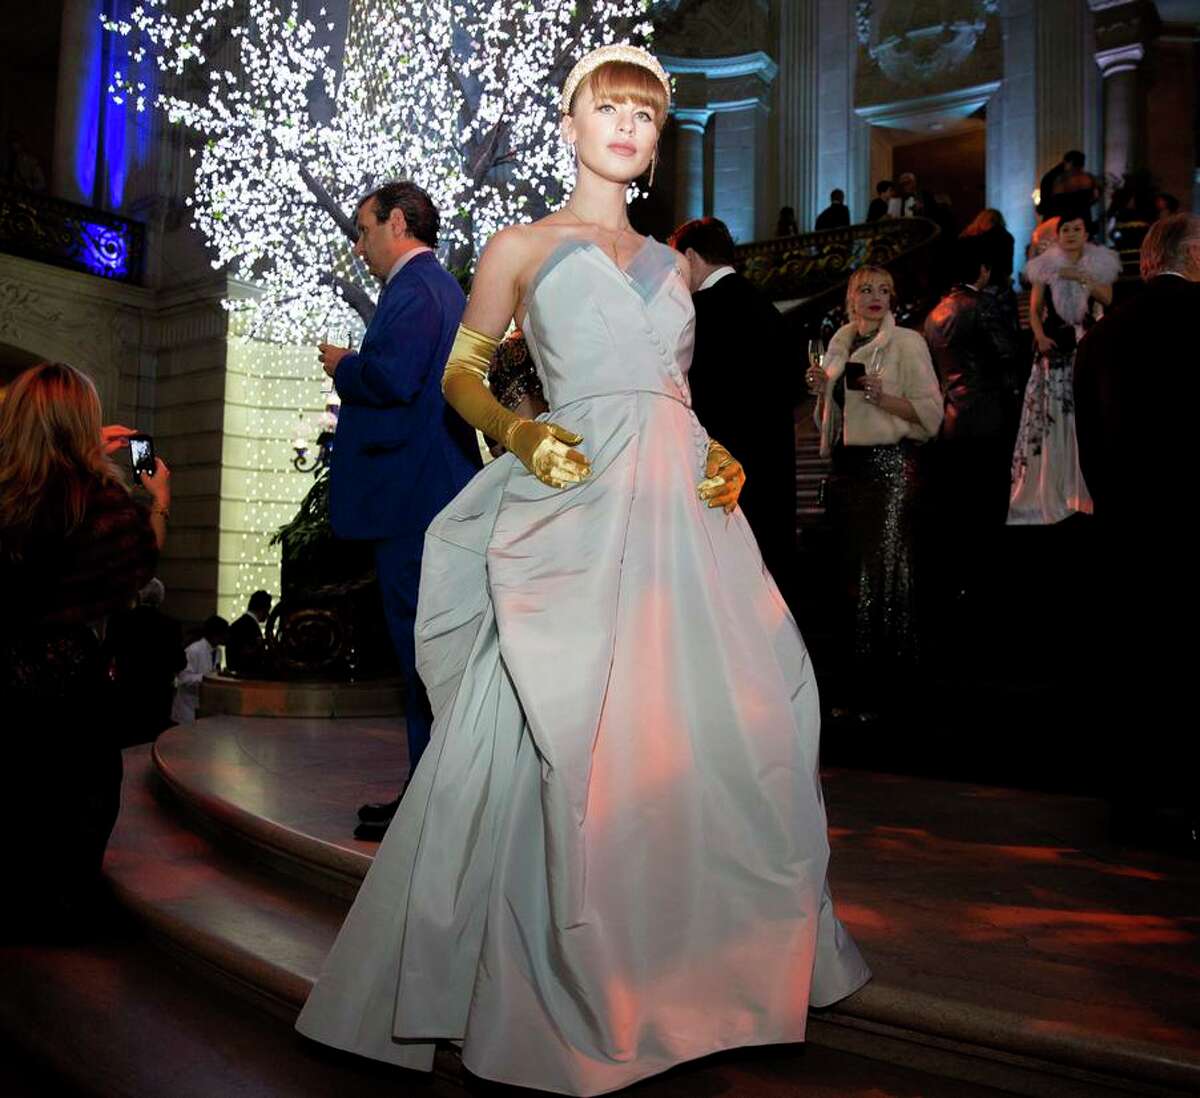 Ivy Getty at City Hall the San Francisco Ballet’s opening night gala in San Francisco, Calif. Getty’s wedding at San Francisco City Hall brought in about $100,000 in fees to the city coffers.